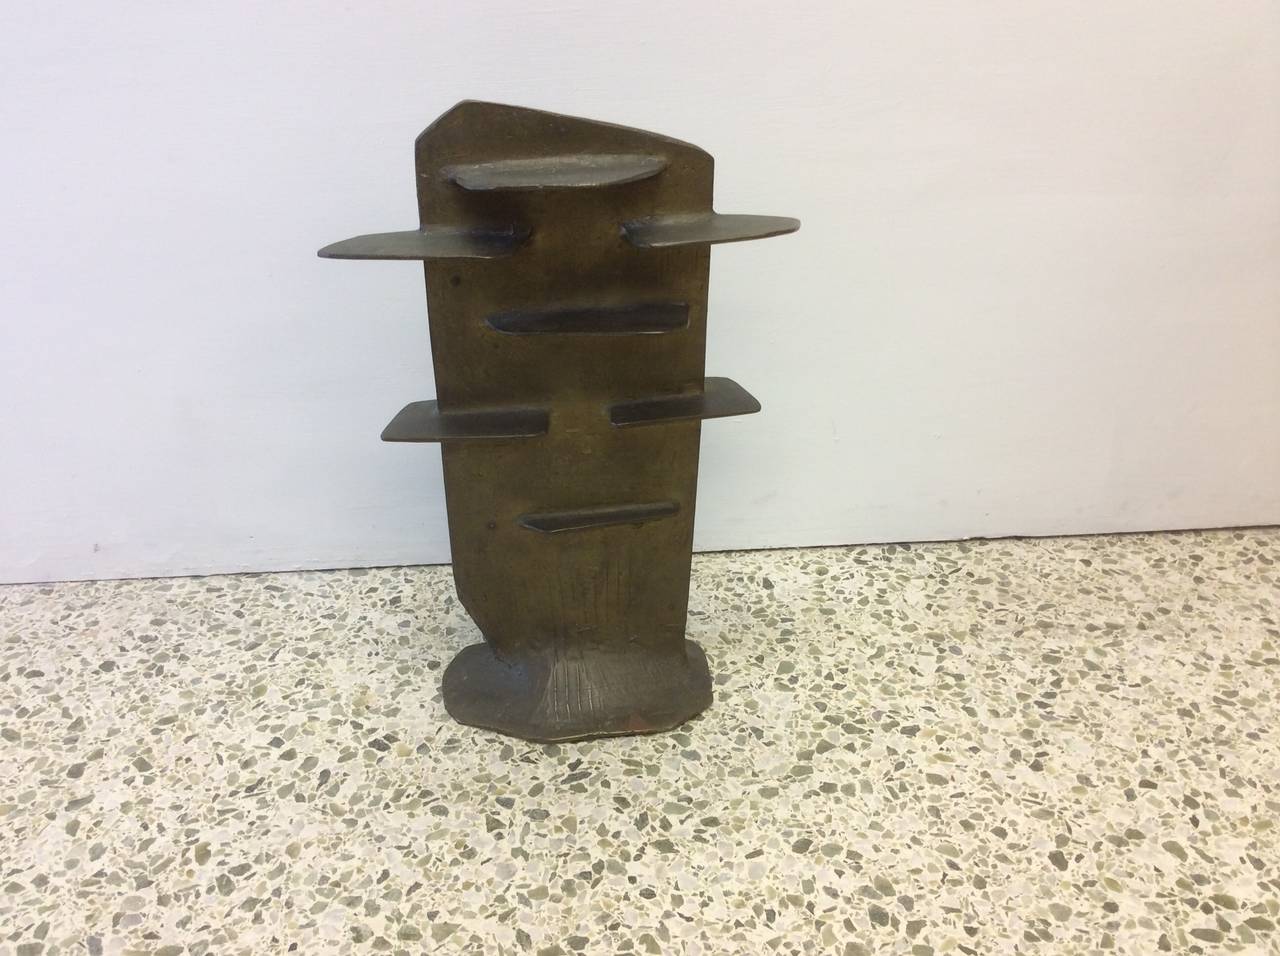 A fine sculpture by Kenneth Armitage exhibiting his post war semi abstract imagery.